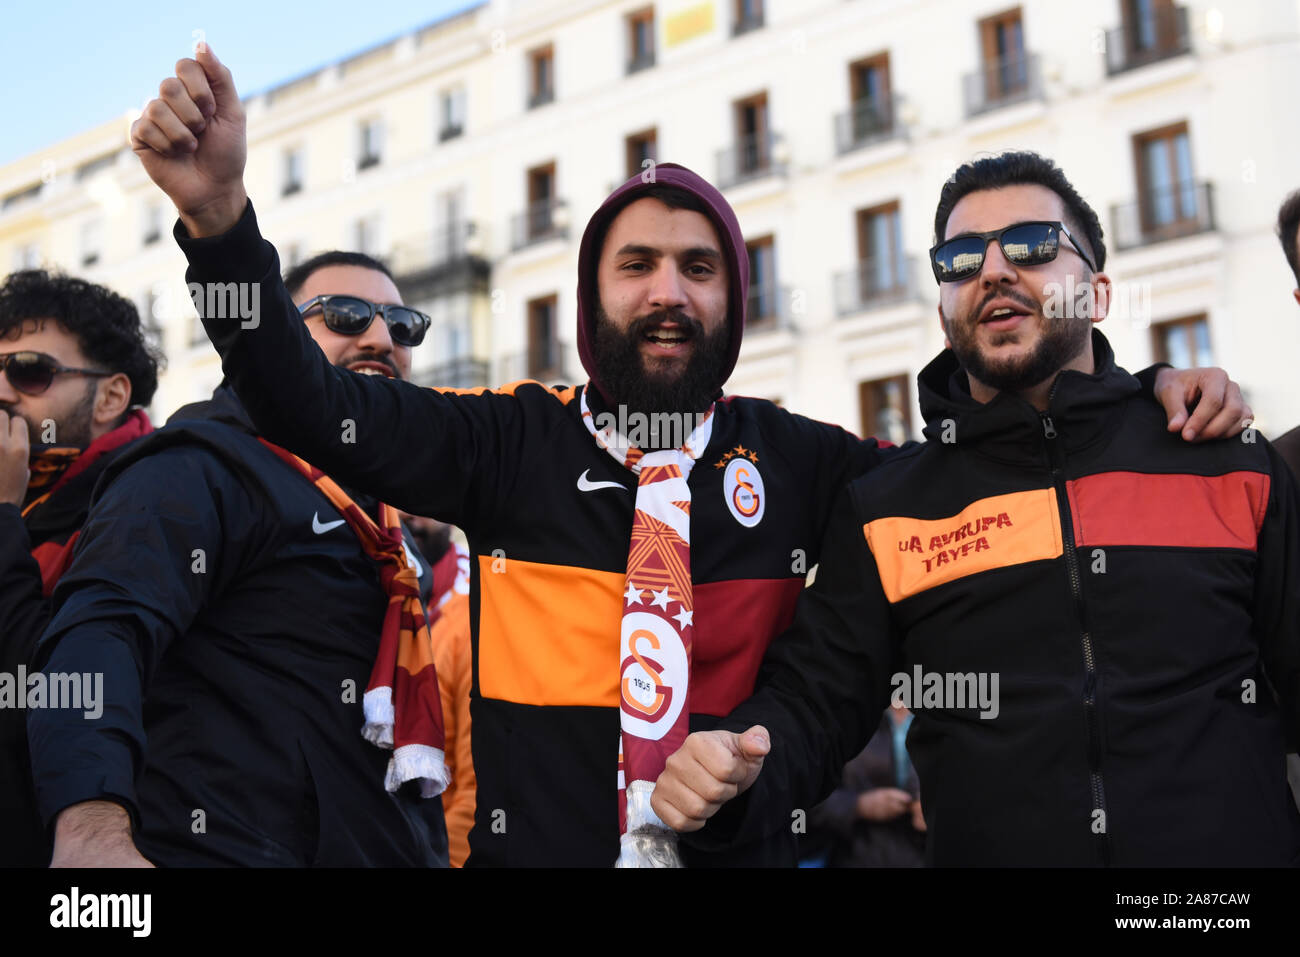 Galatasay fans shouting slogans in Madrid. Around 3000 Galatasaray fans  gather in central Madrid ahead of the UEFA Champions League match between  Real Madrid and Galayasaray. (Photo by John Milner / SOPA